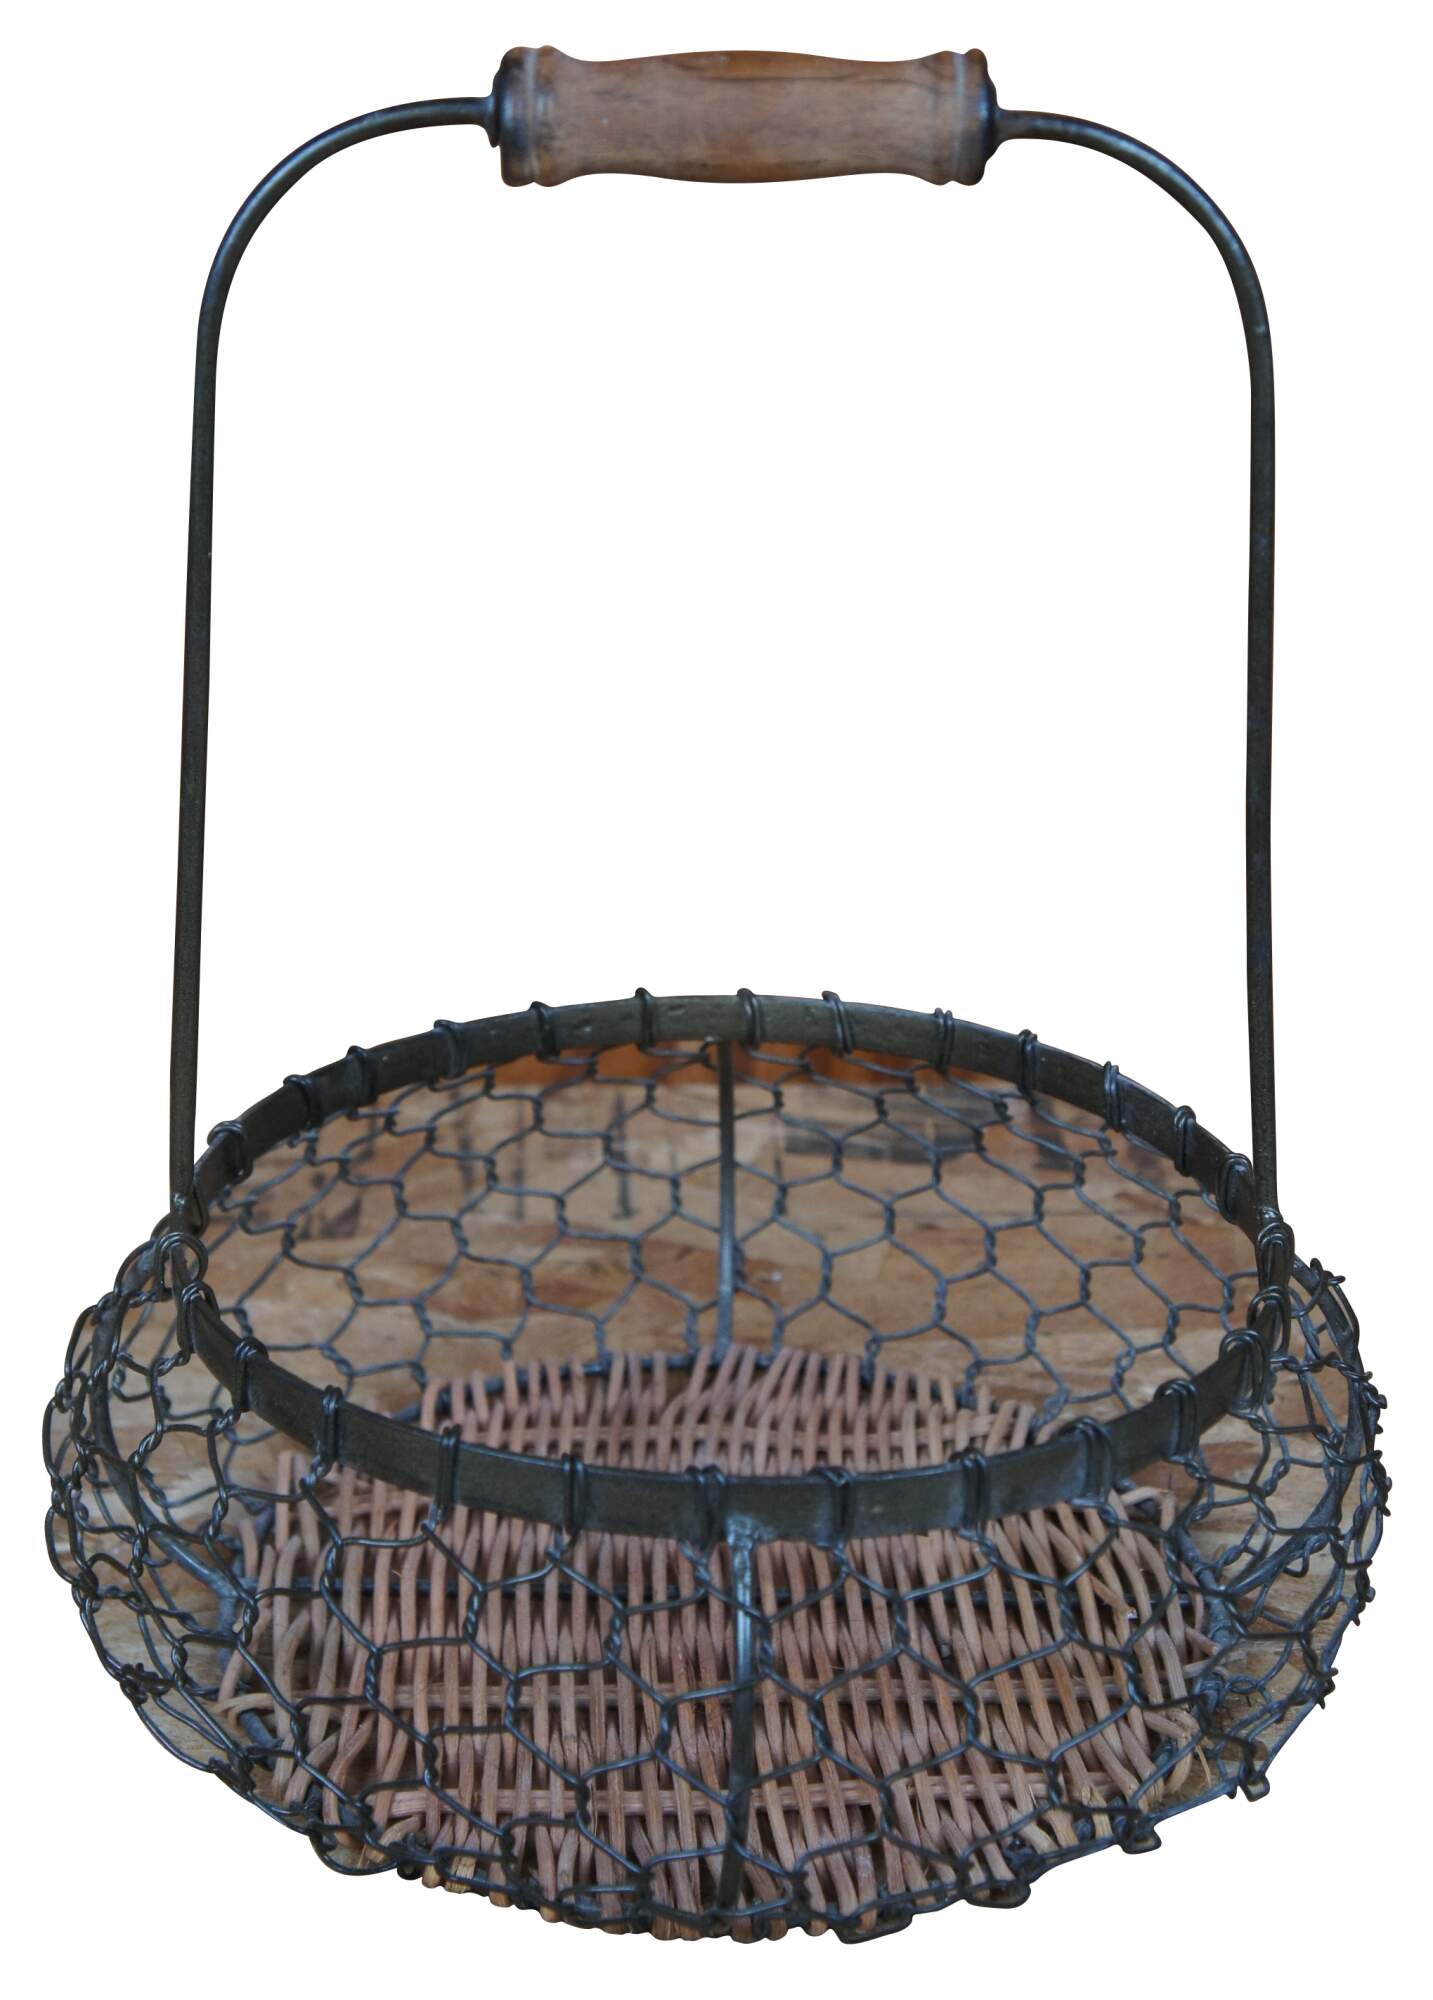 Round Chicken Wire Egg Baskets,Rusty color,LINcOUNTRY Rustic Metal Egg Baskets for Fresh Eggs with Handle,country Primitive Farmhouse Vintage Style GA